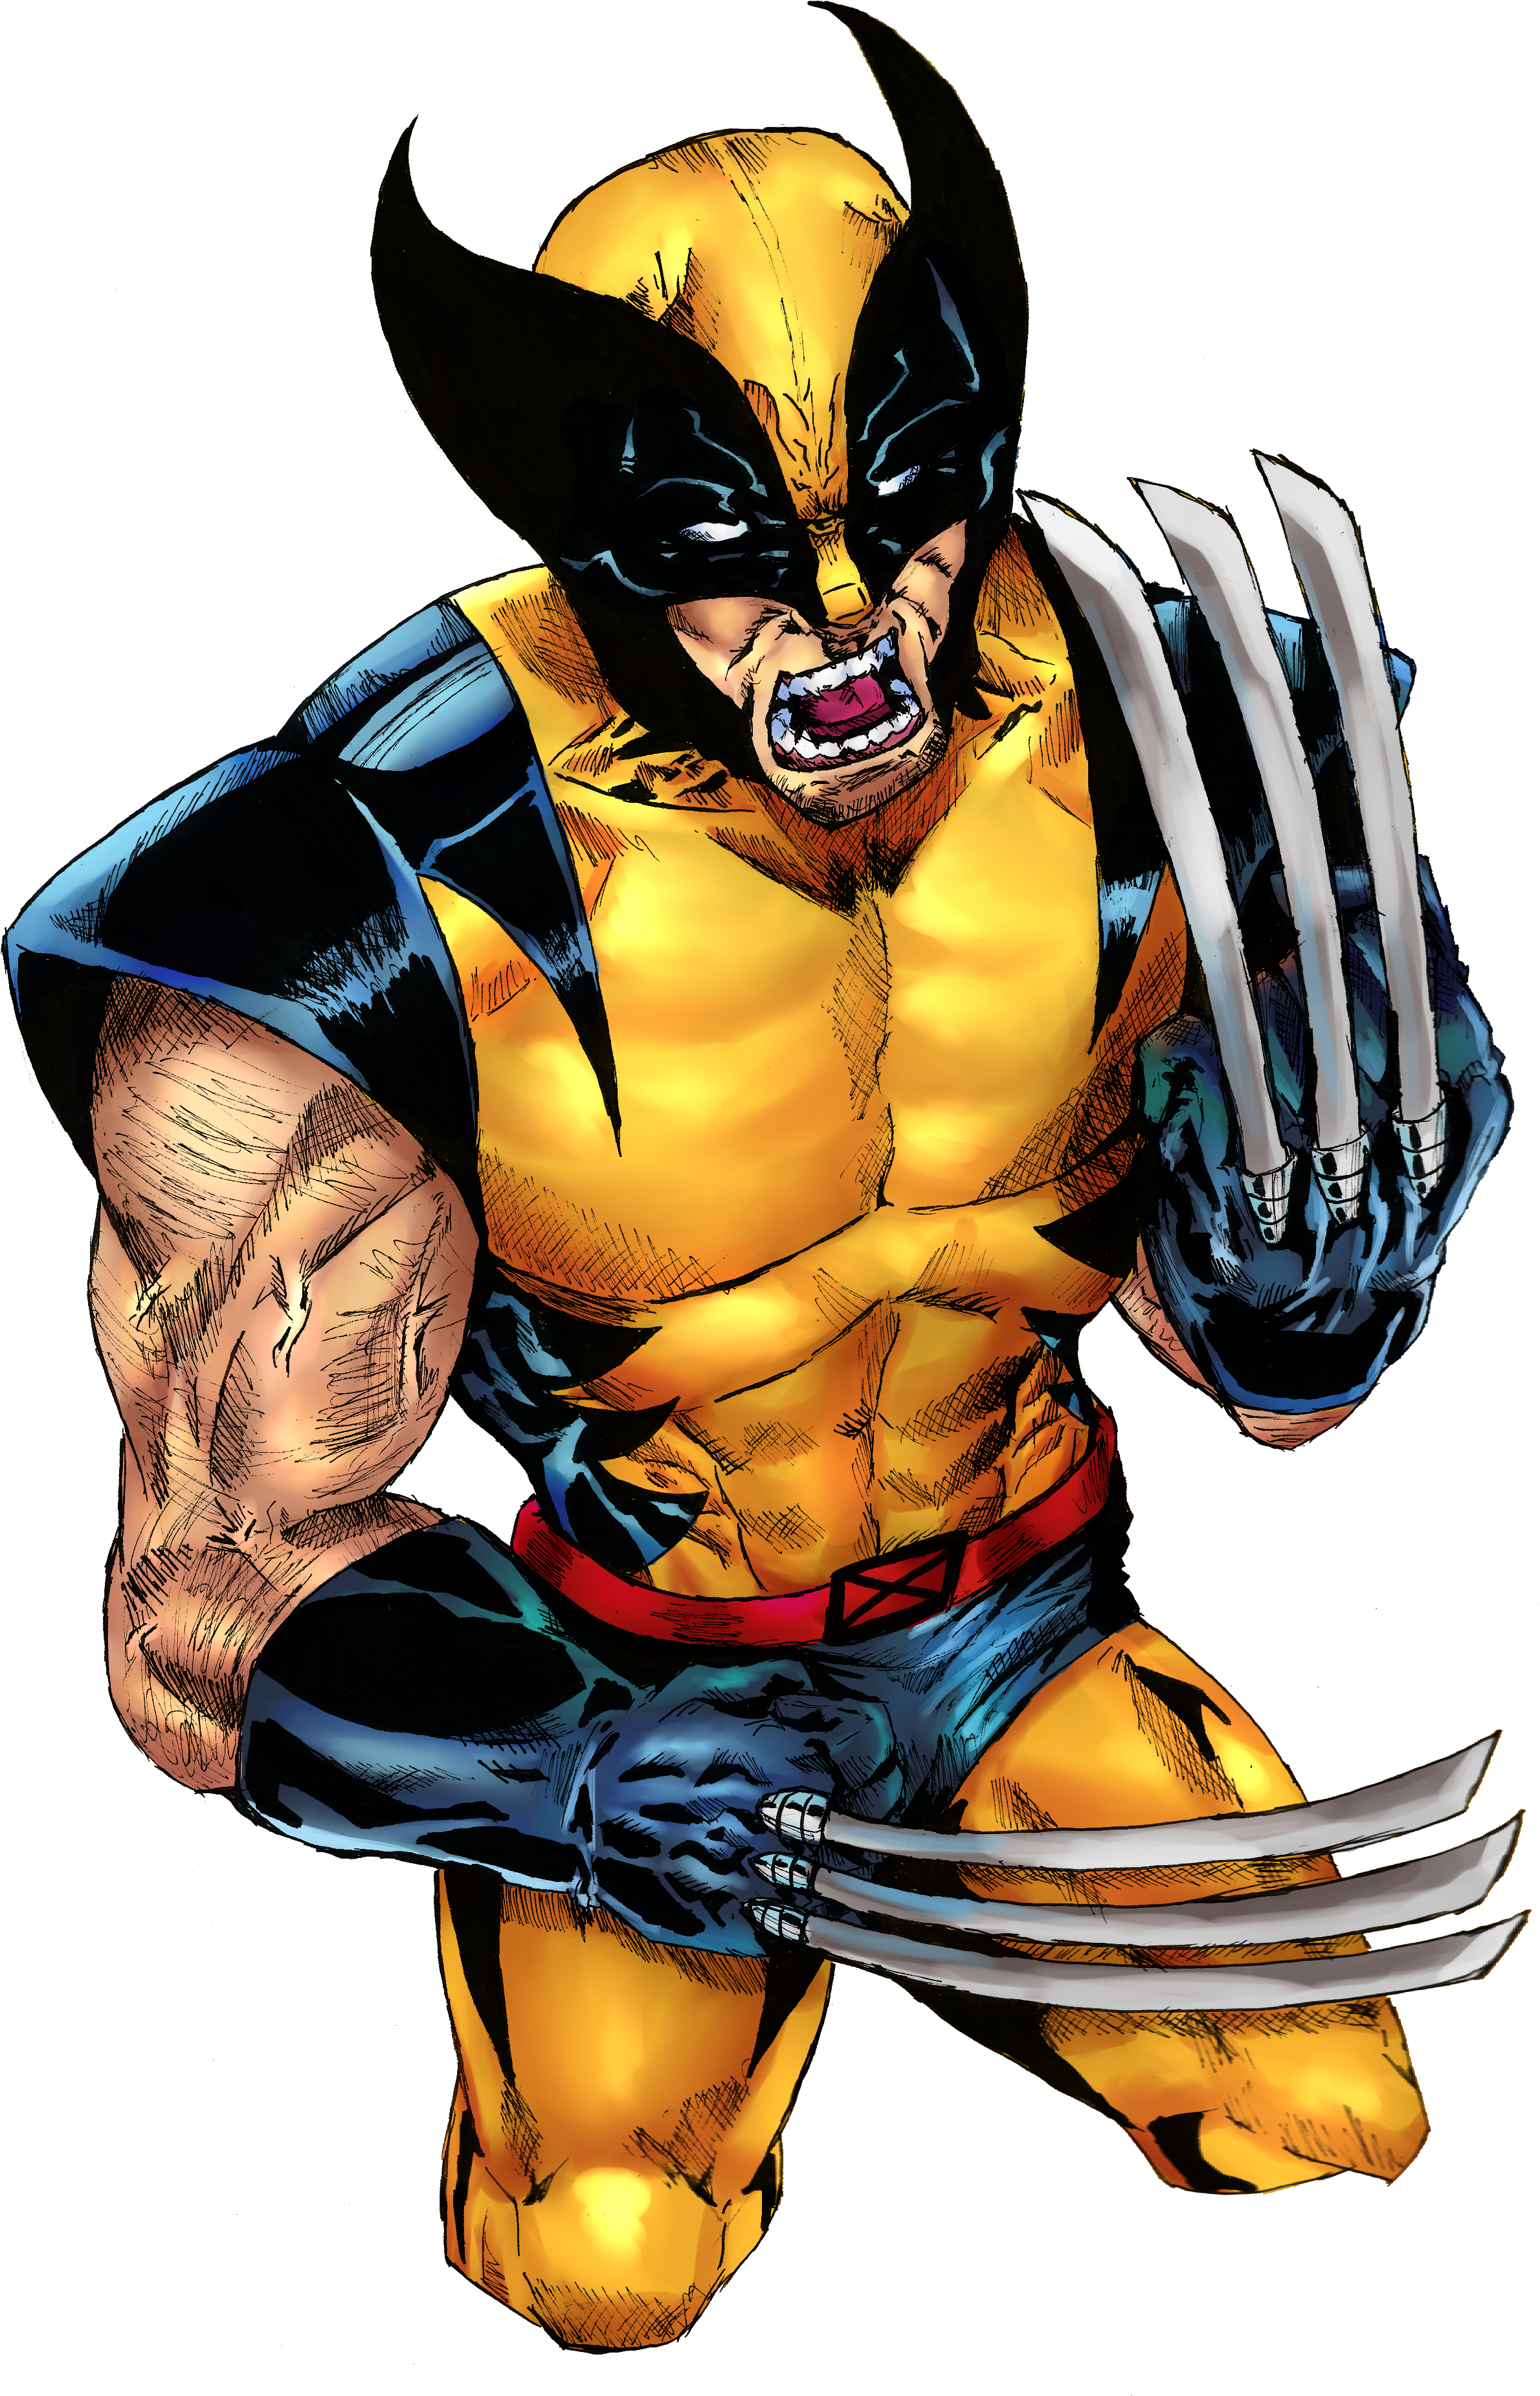 A Comic Book Character With Claws